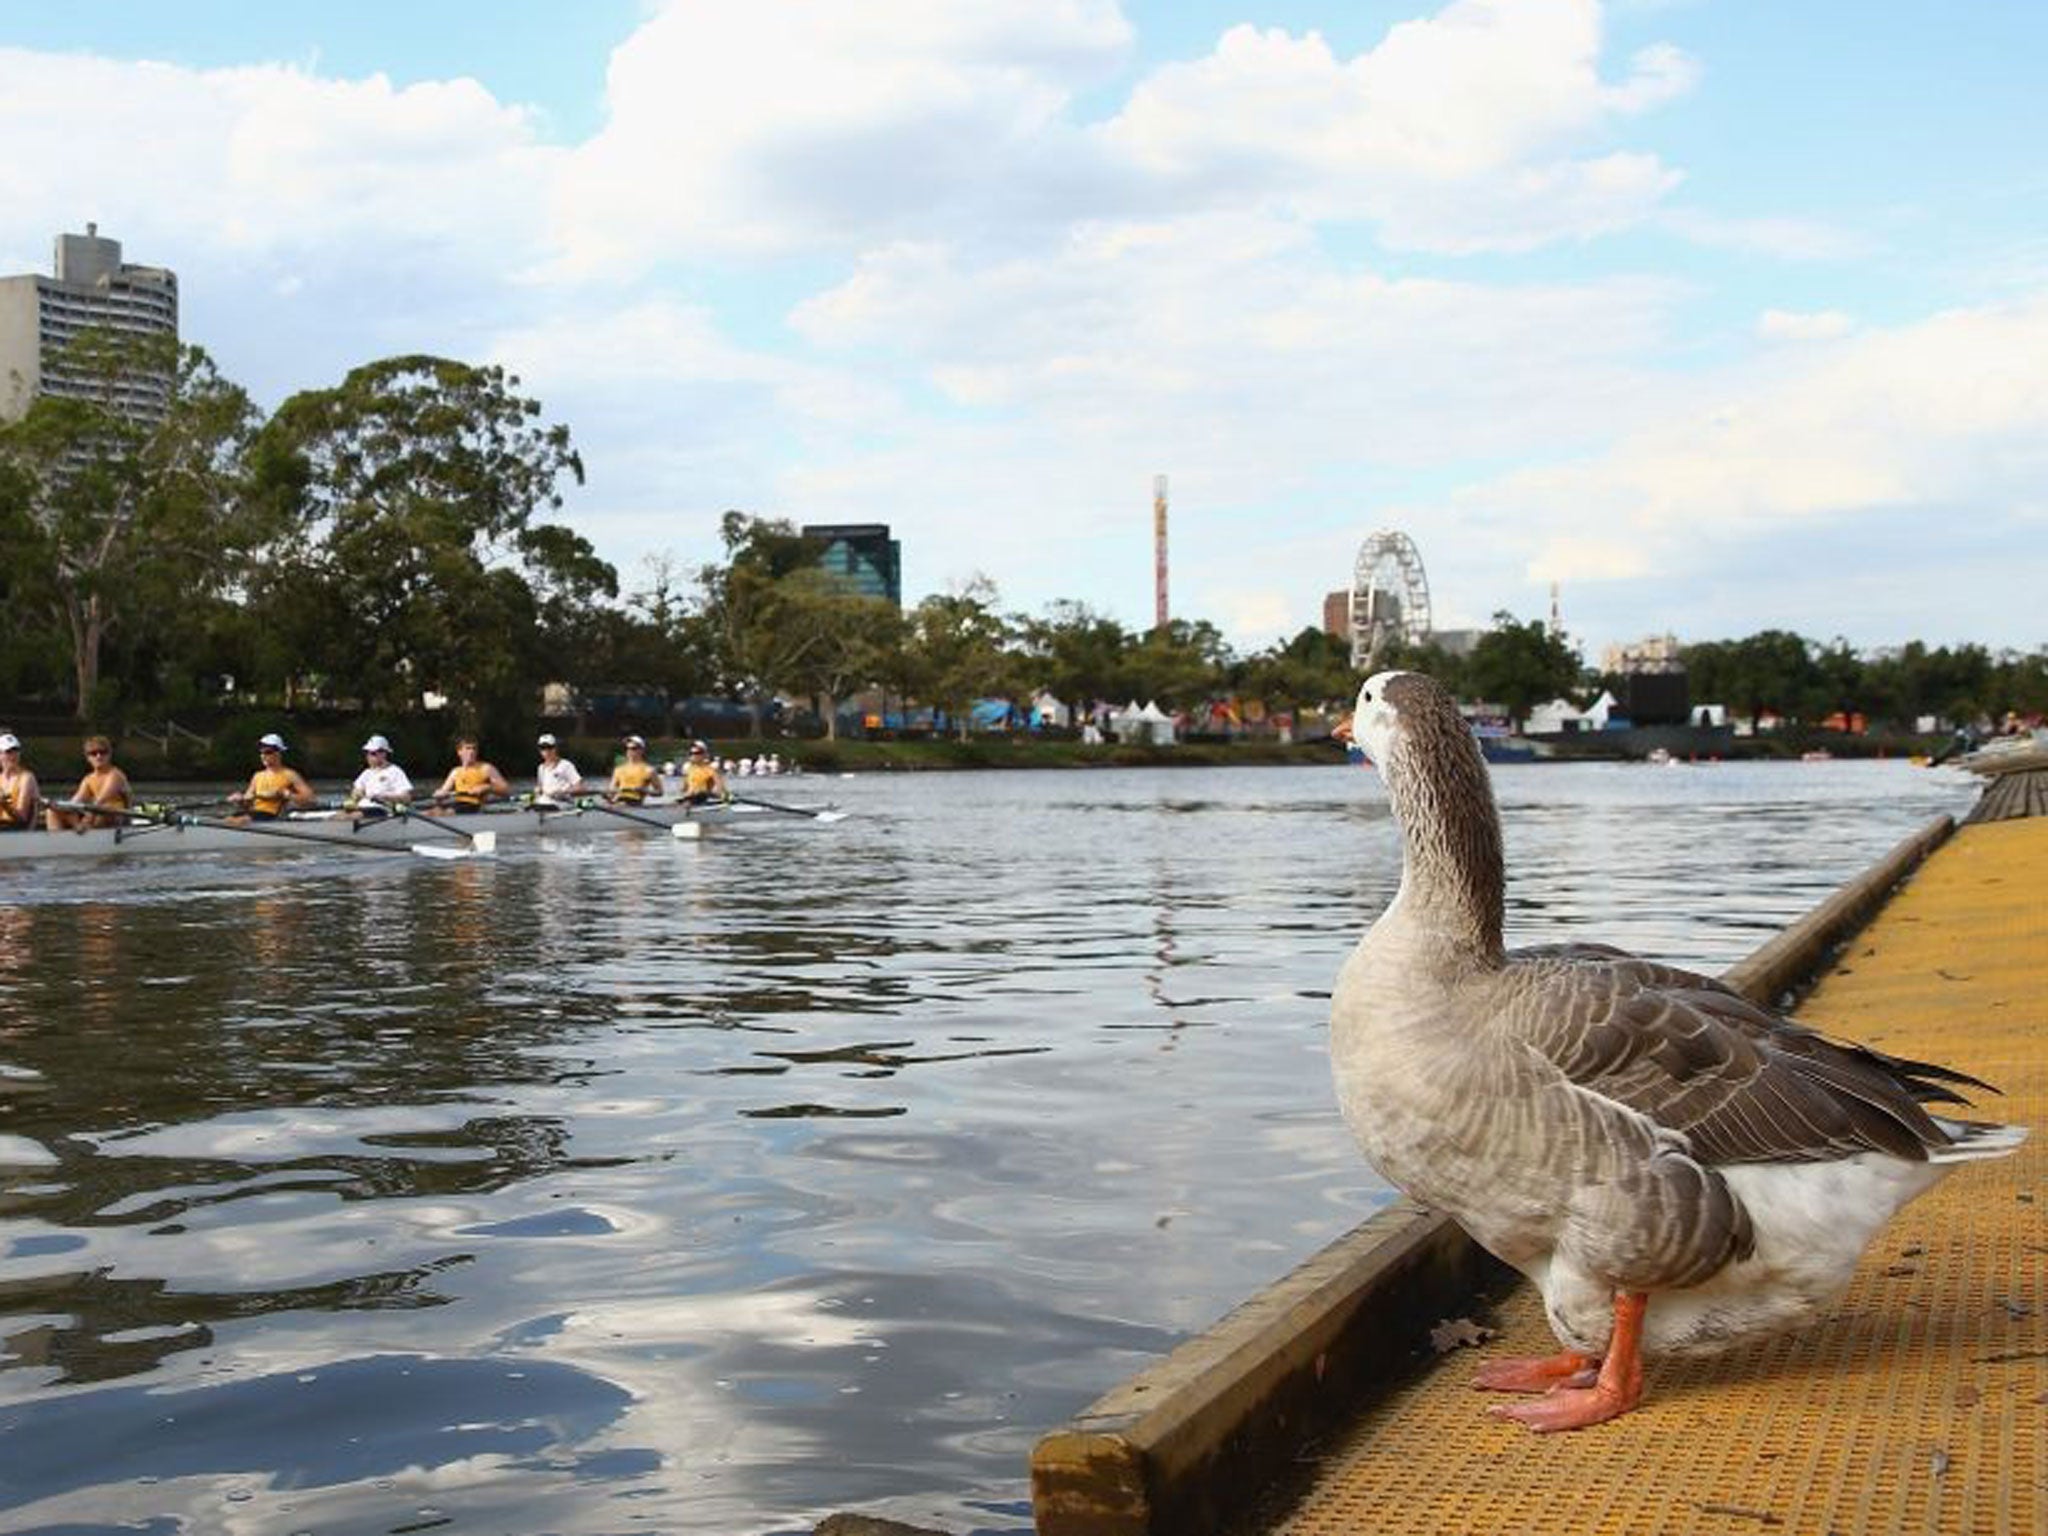 Rowing on Melbourne's Yarra River